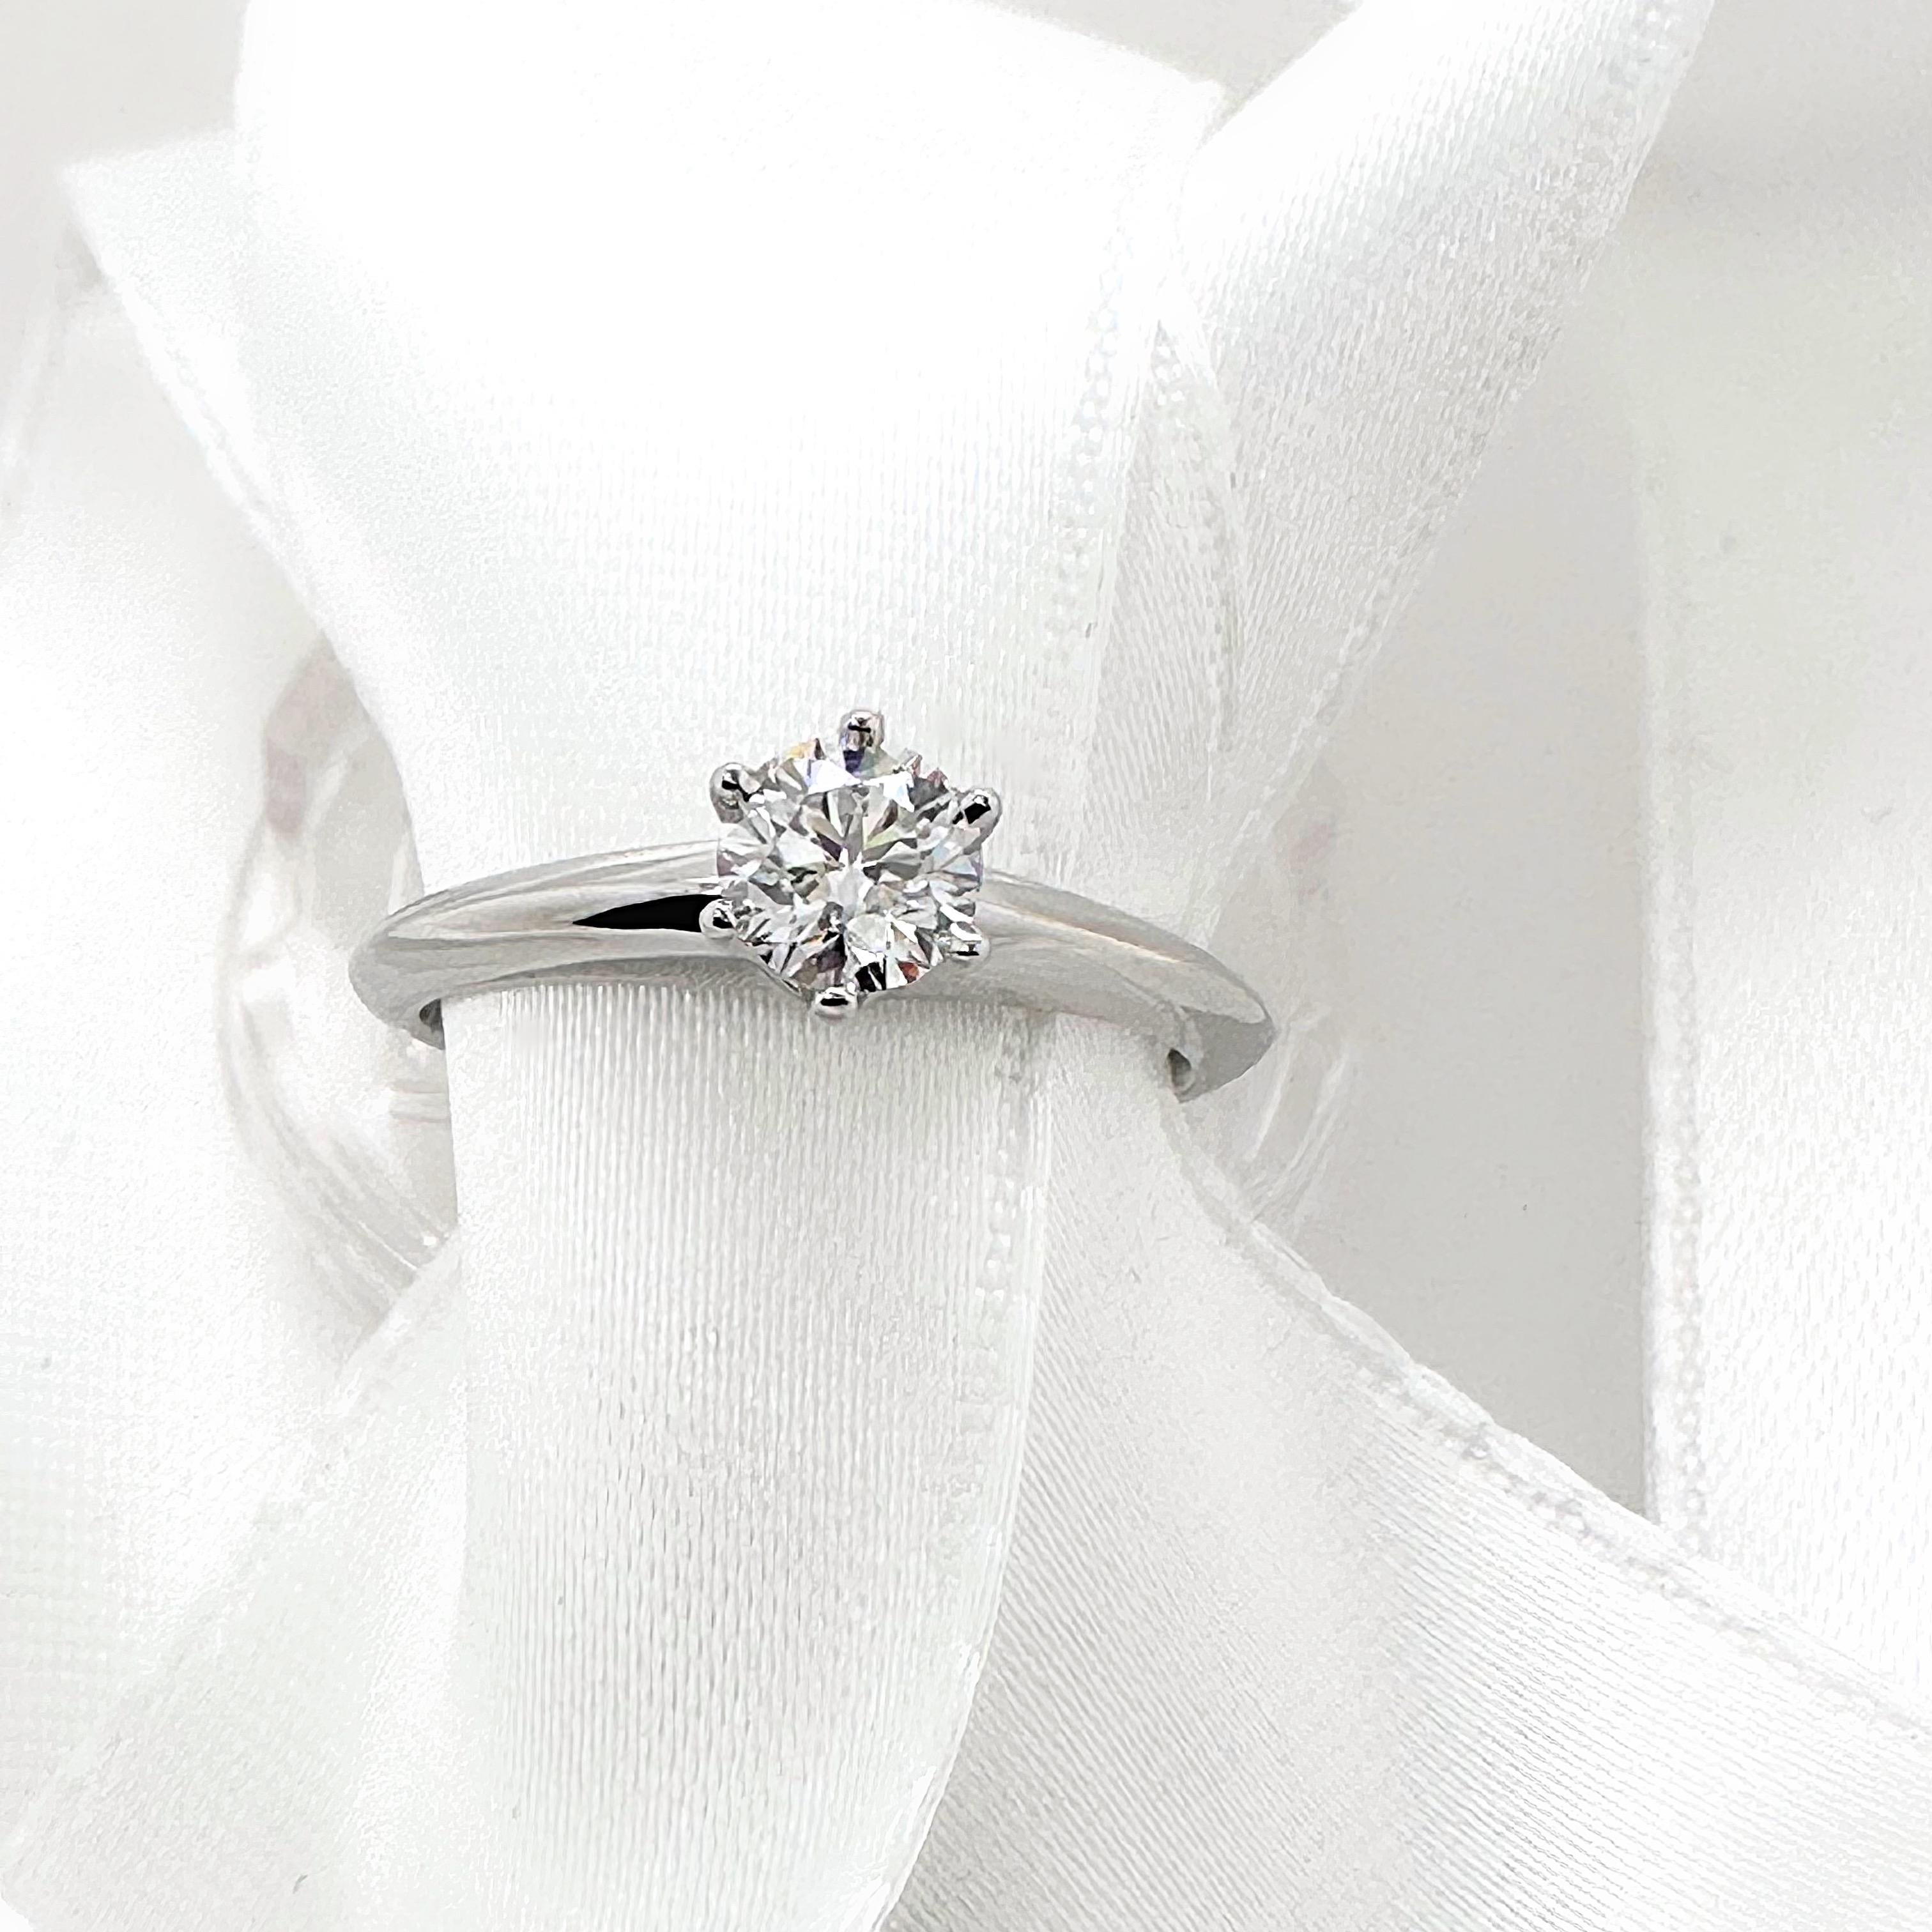 Tiffany & Co. Round Diamond 0.37 Cts F VVS1 Solitaire Engagement Ring Platinum For Sale 1